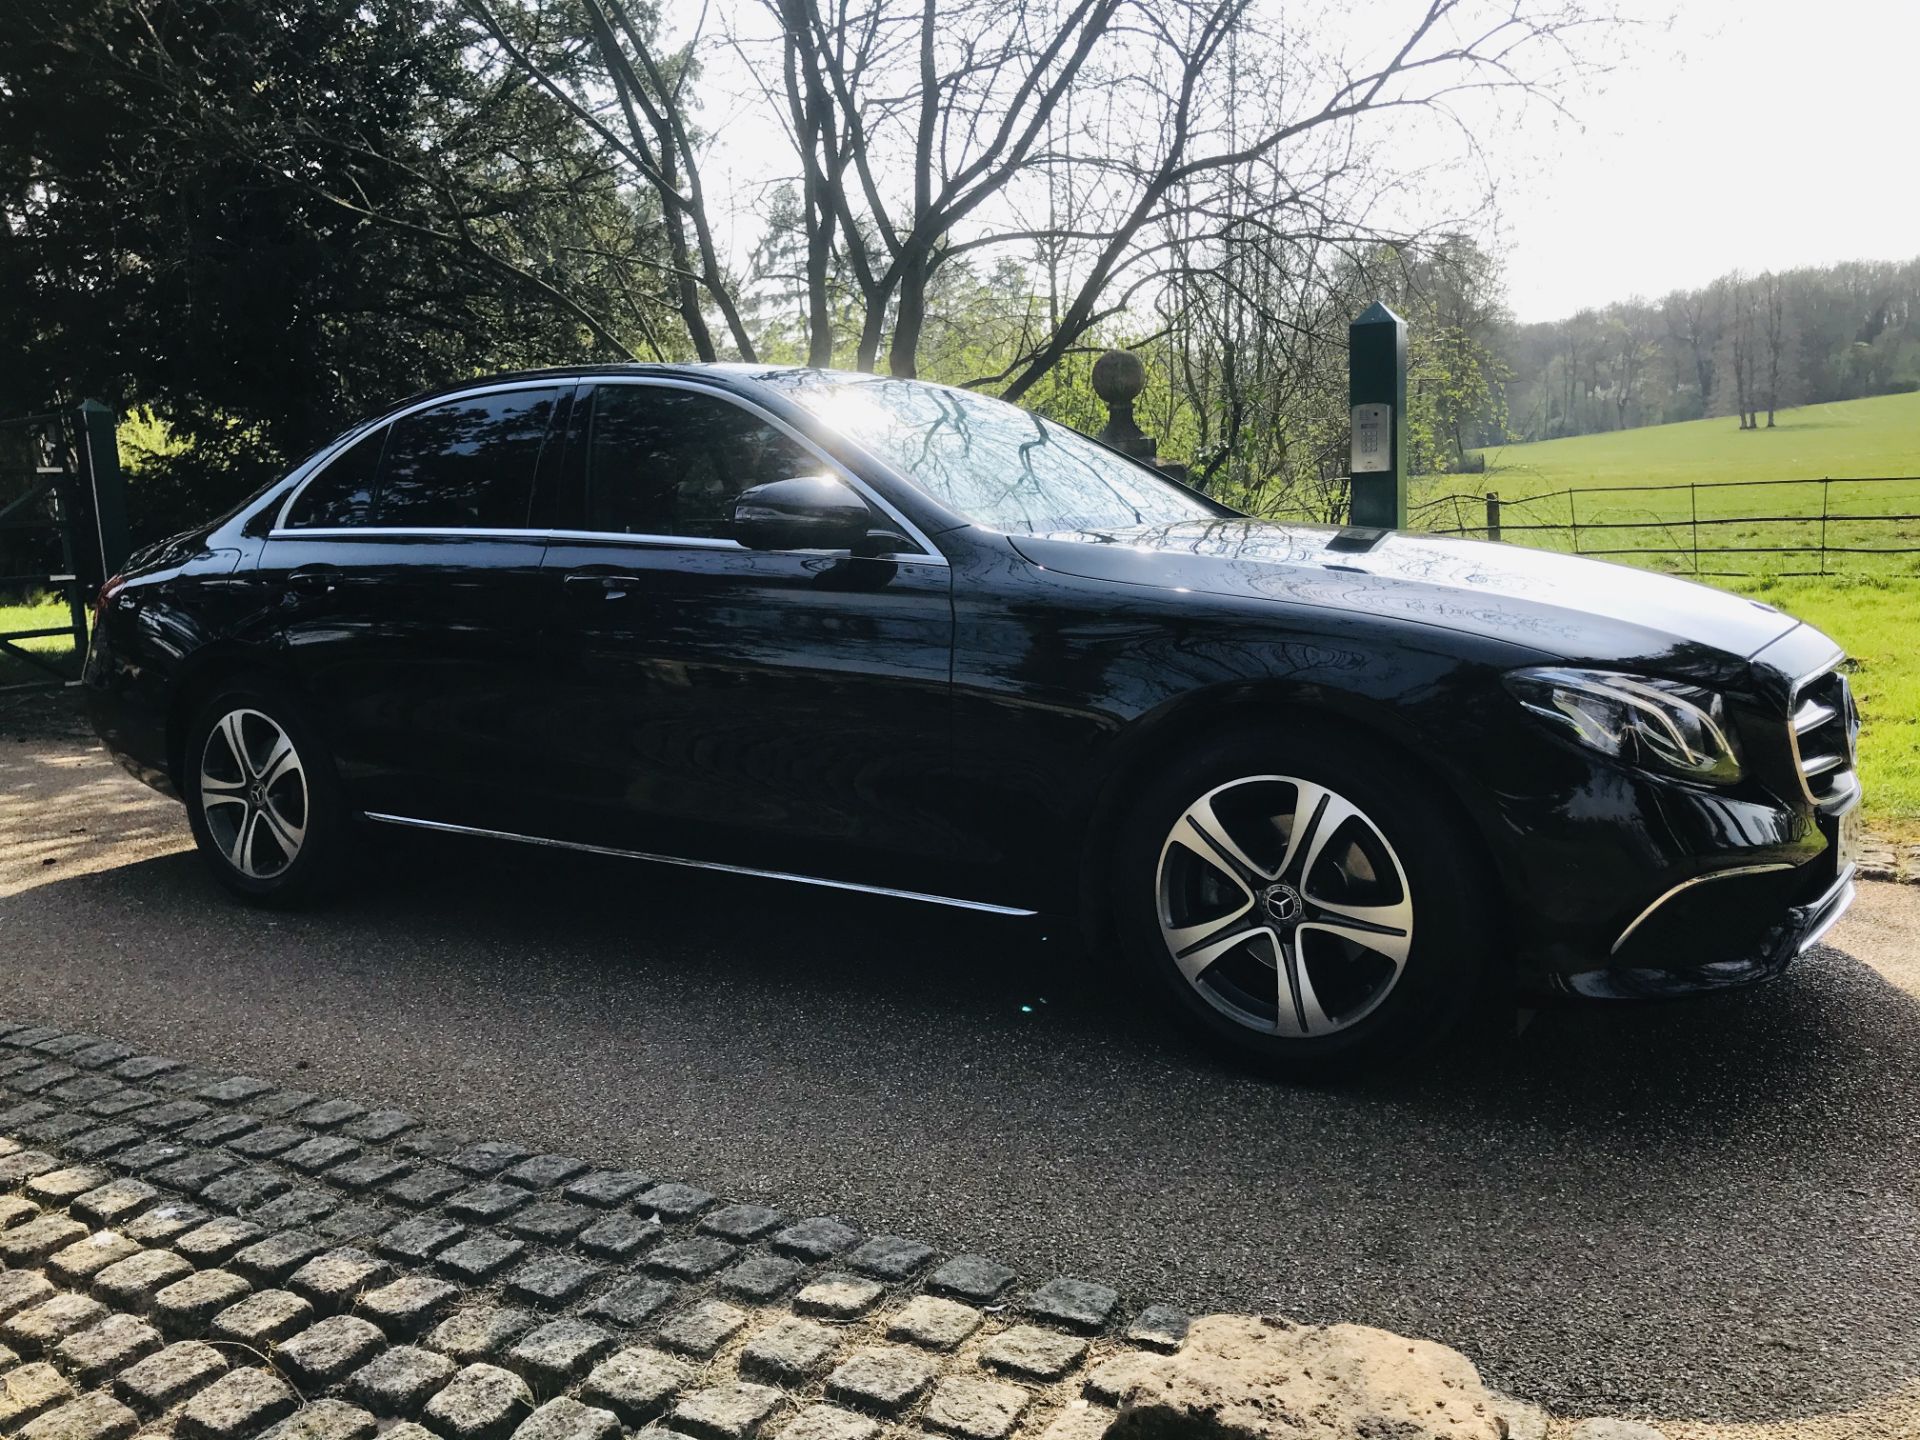 On Sale MERCEDES E220d "SPECIAL EQUIPMENT" 9G TRONIC (2019 MODEL) 1 OWNER - SAT NAV - LEATHER - WOW!